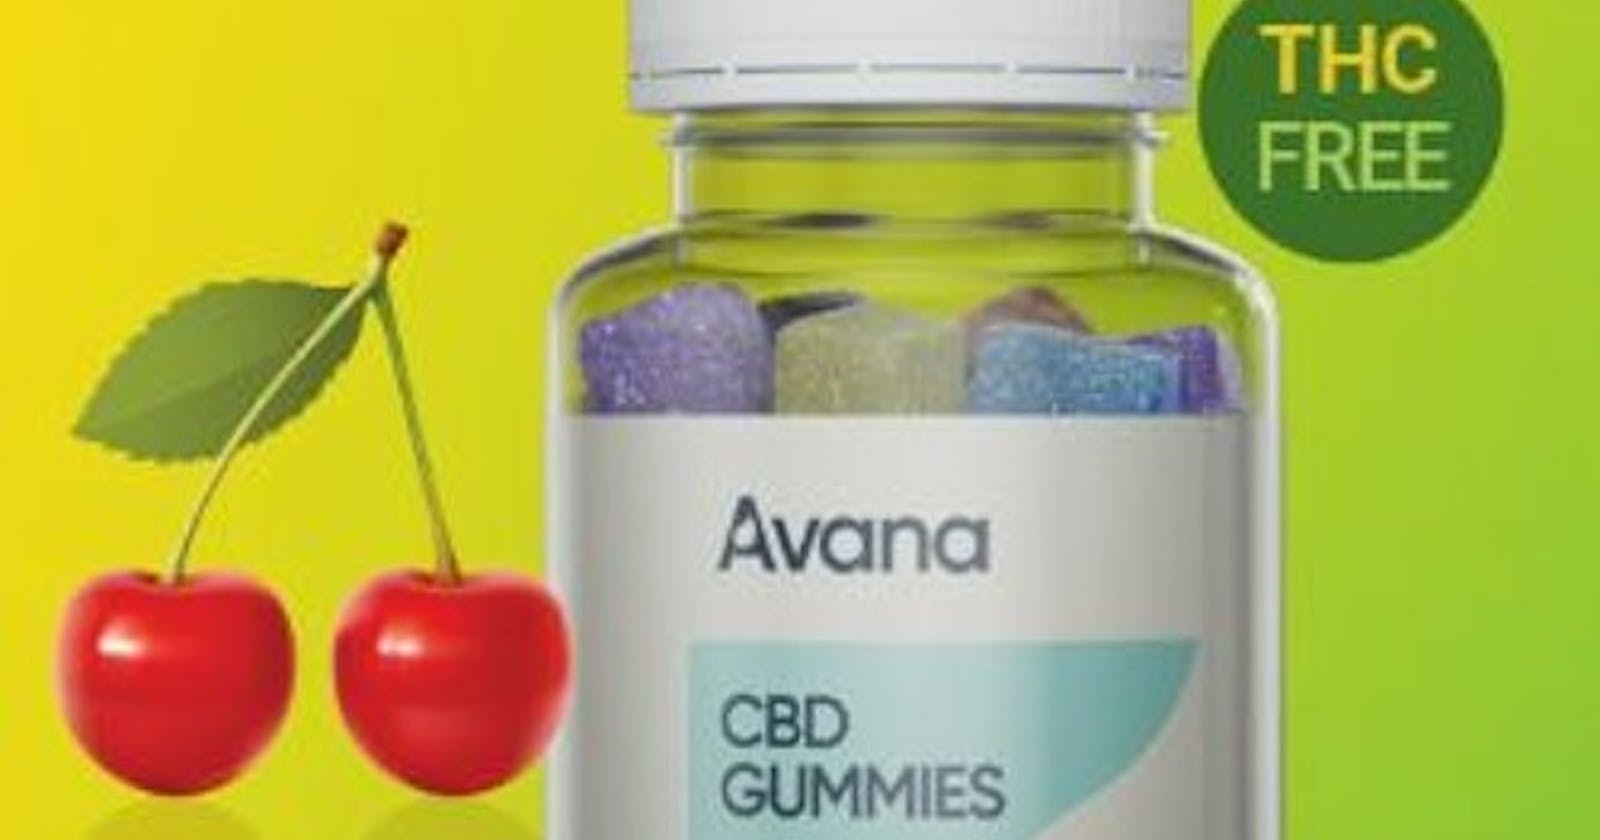 Avana CBD Gummies Reviews, Cost, Ingredients | Scam Or Legit? Side Effects & Where To Buy?